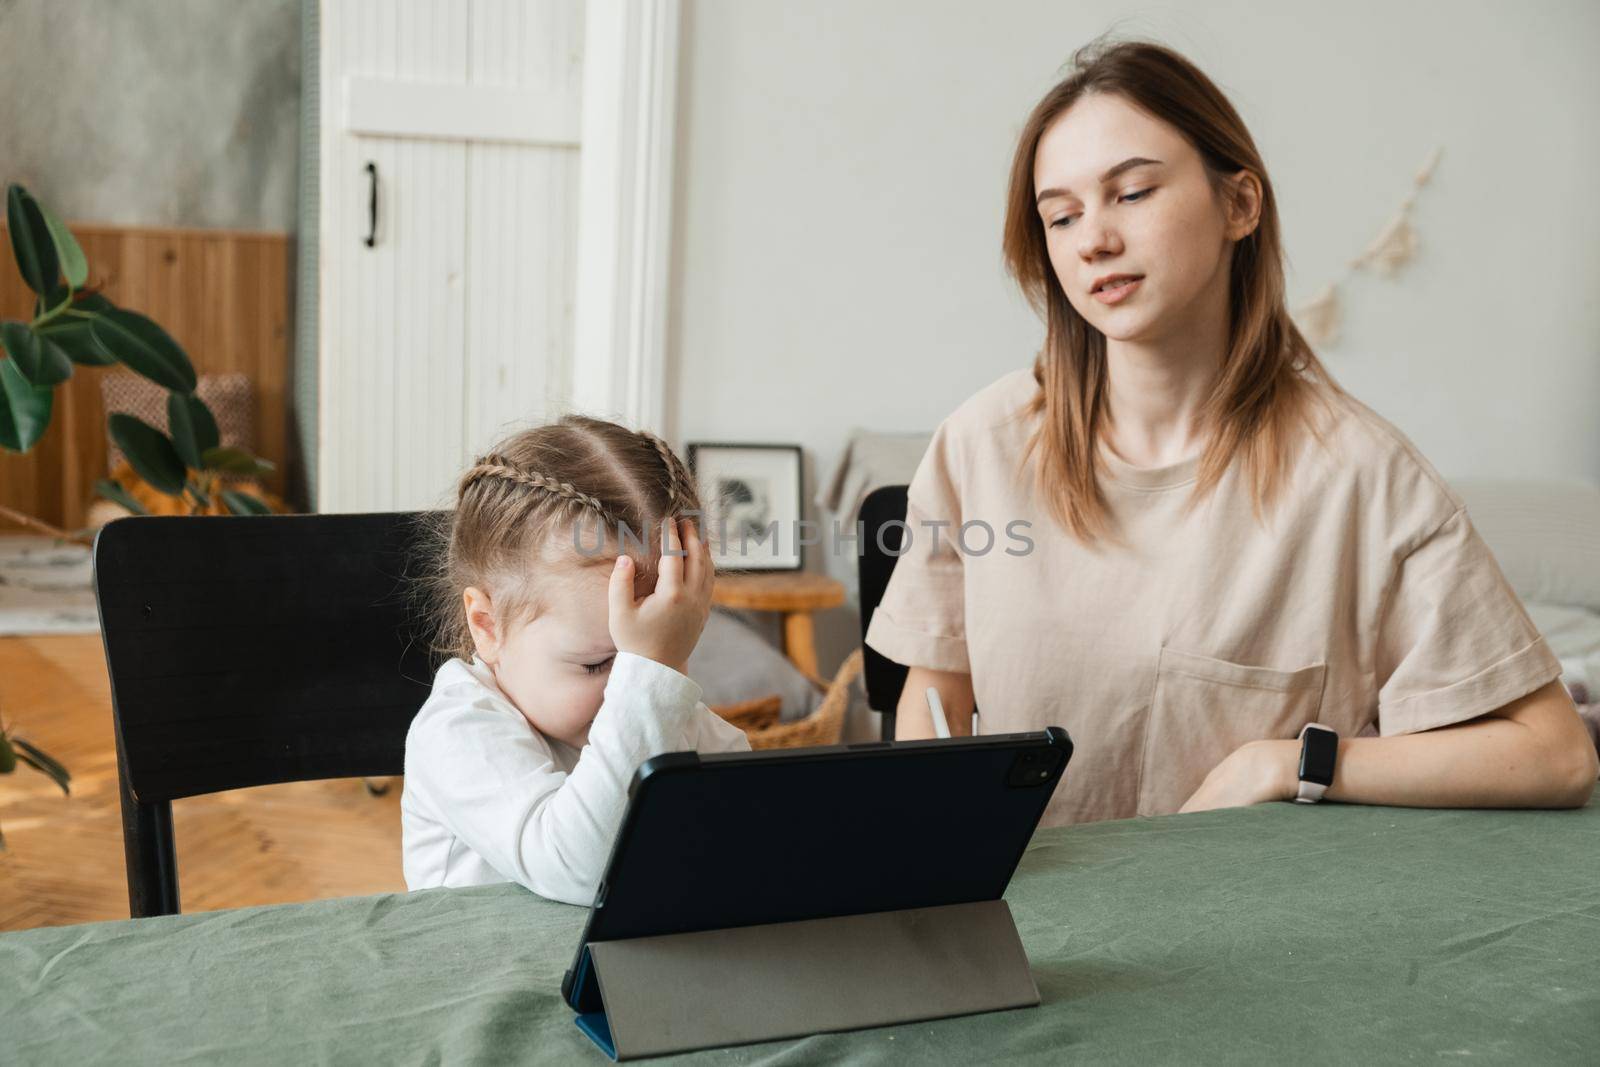 The little girl does not understand how to do homework or solve a problem. Stressed mother homeschooling with her child during coronavirus, Covid-19 outbreak quarantine. Self isolation, social distancing concept. by etonastenka